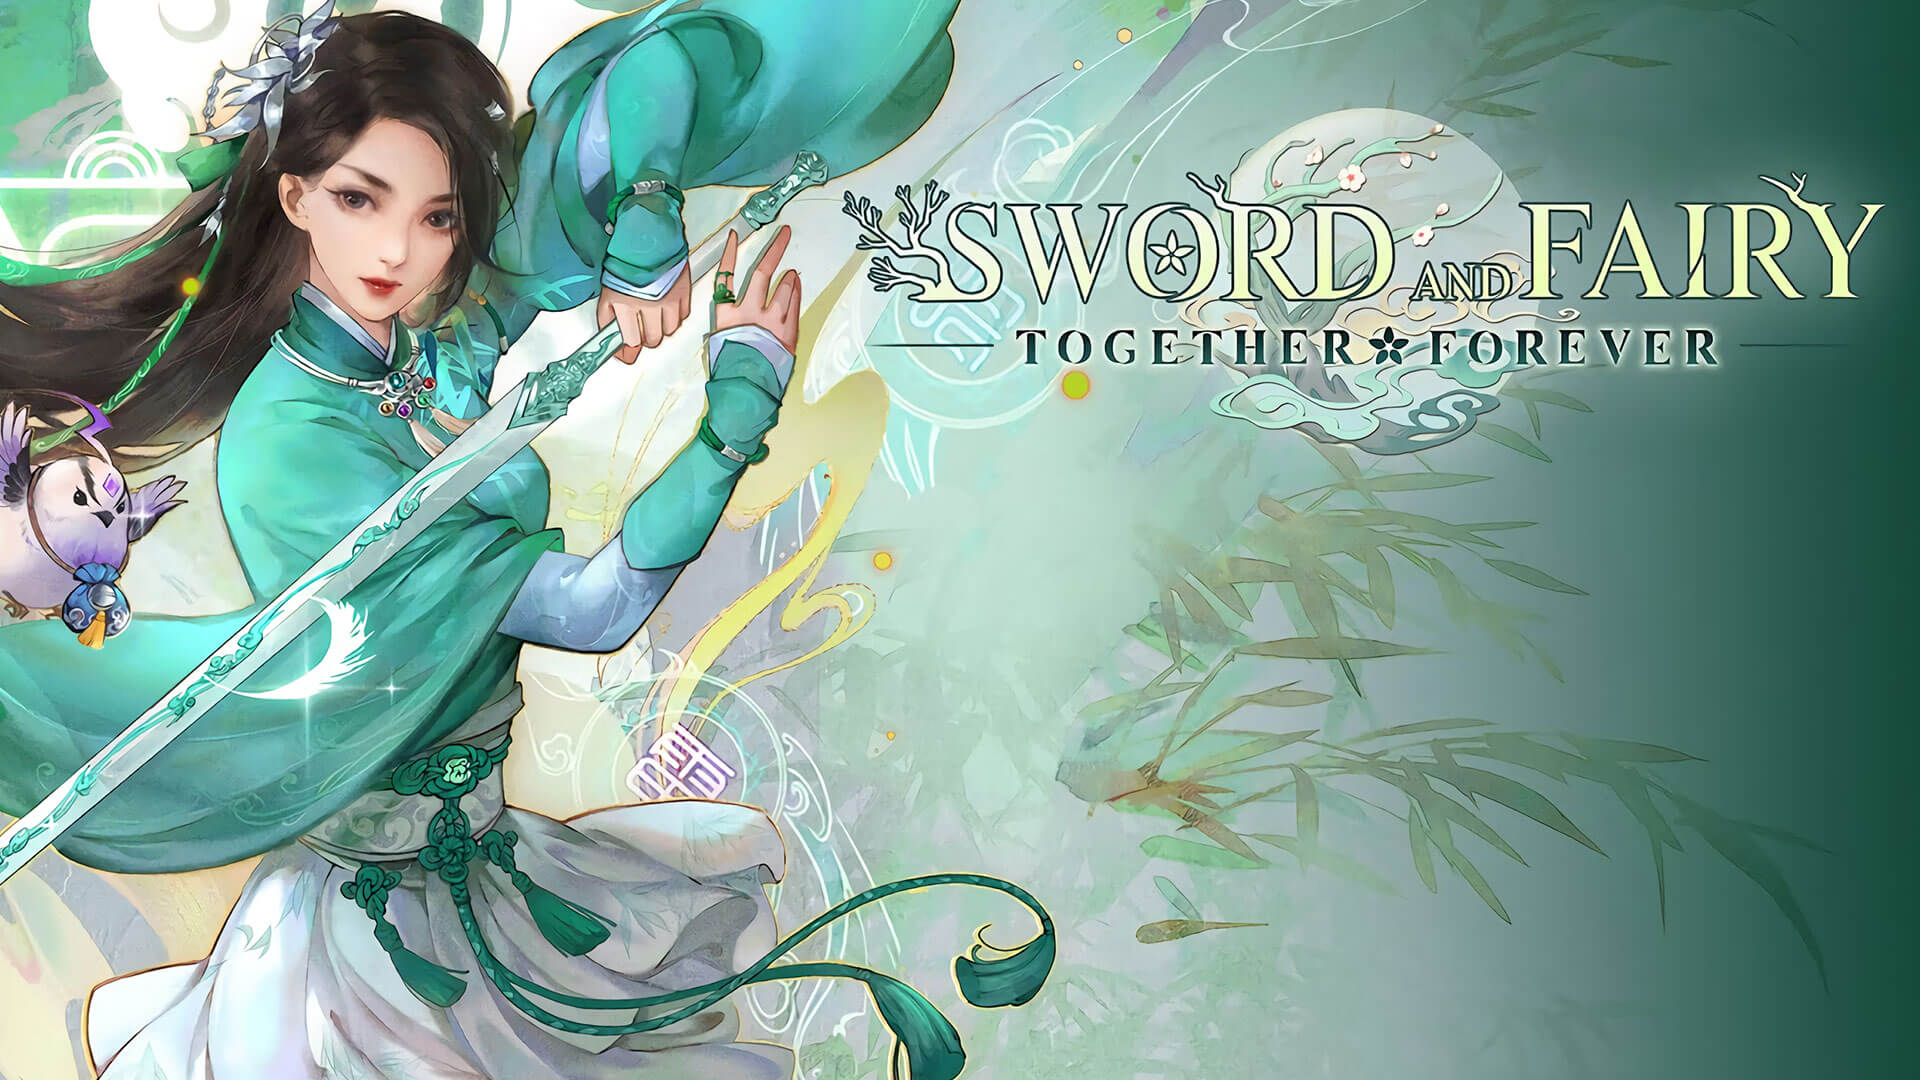 Fairy and Sword Forever Together (August 2022) Complete Details!